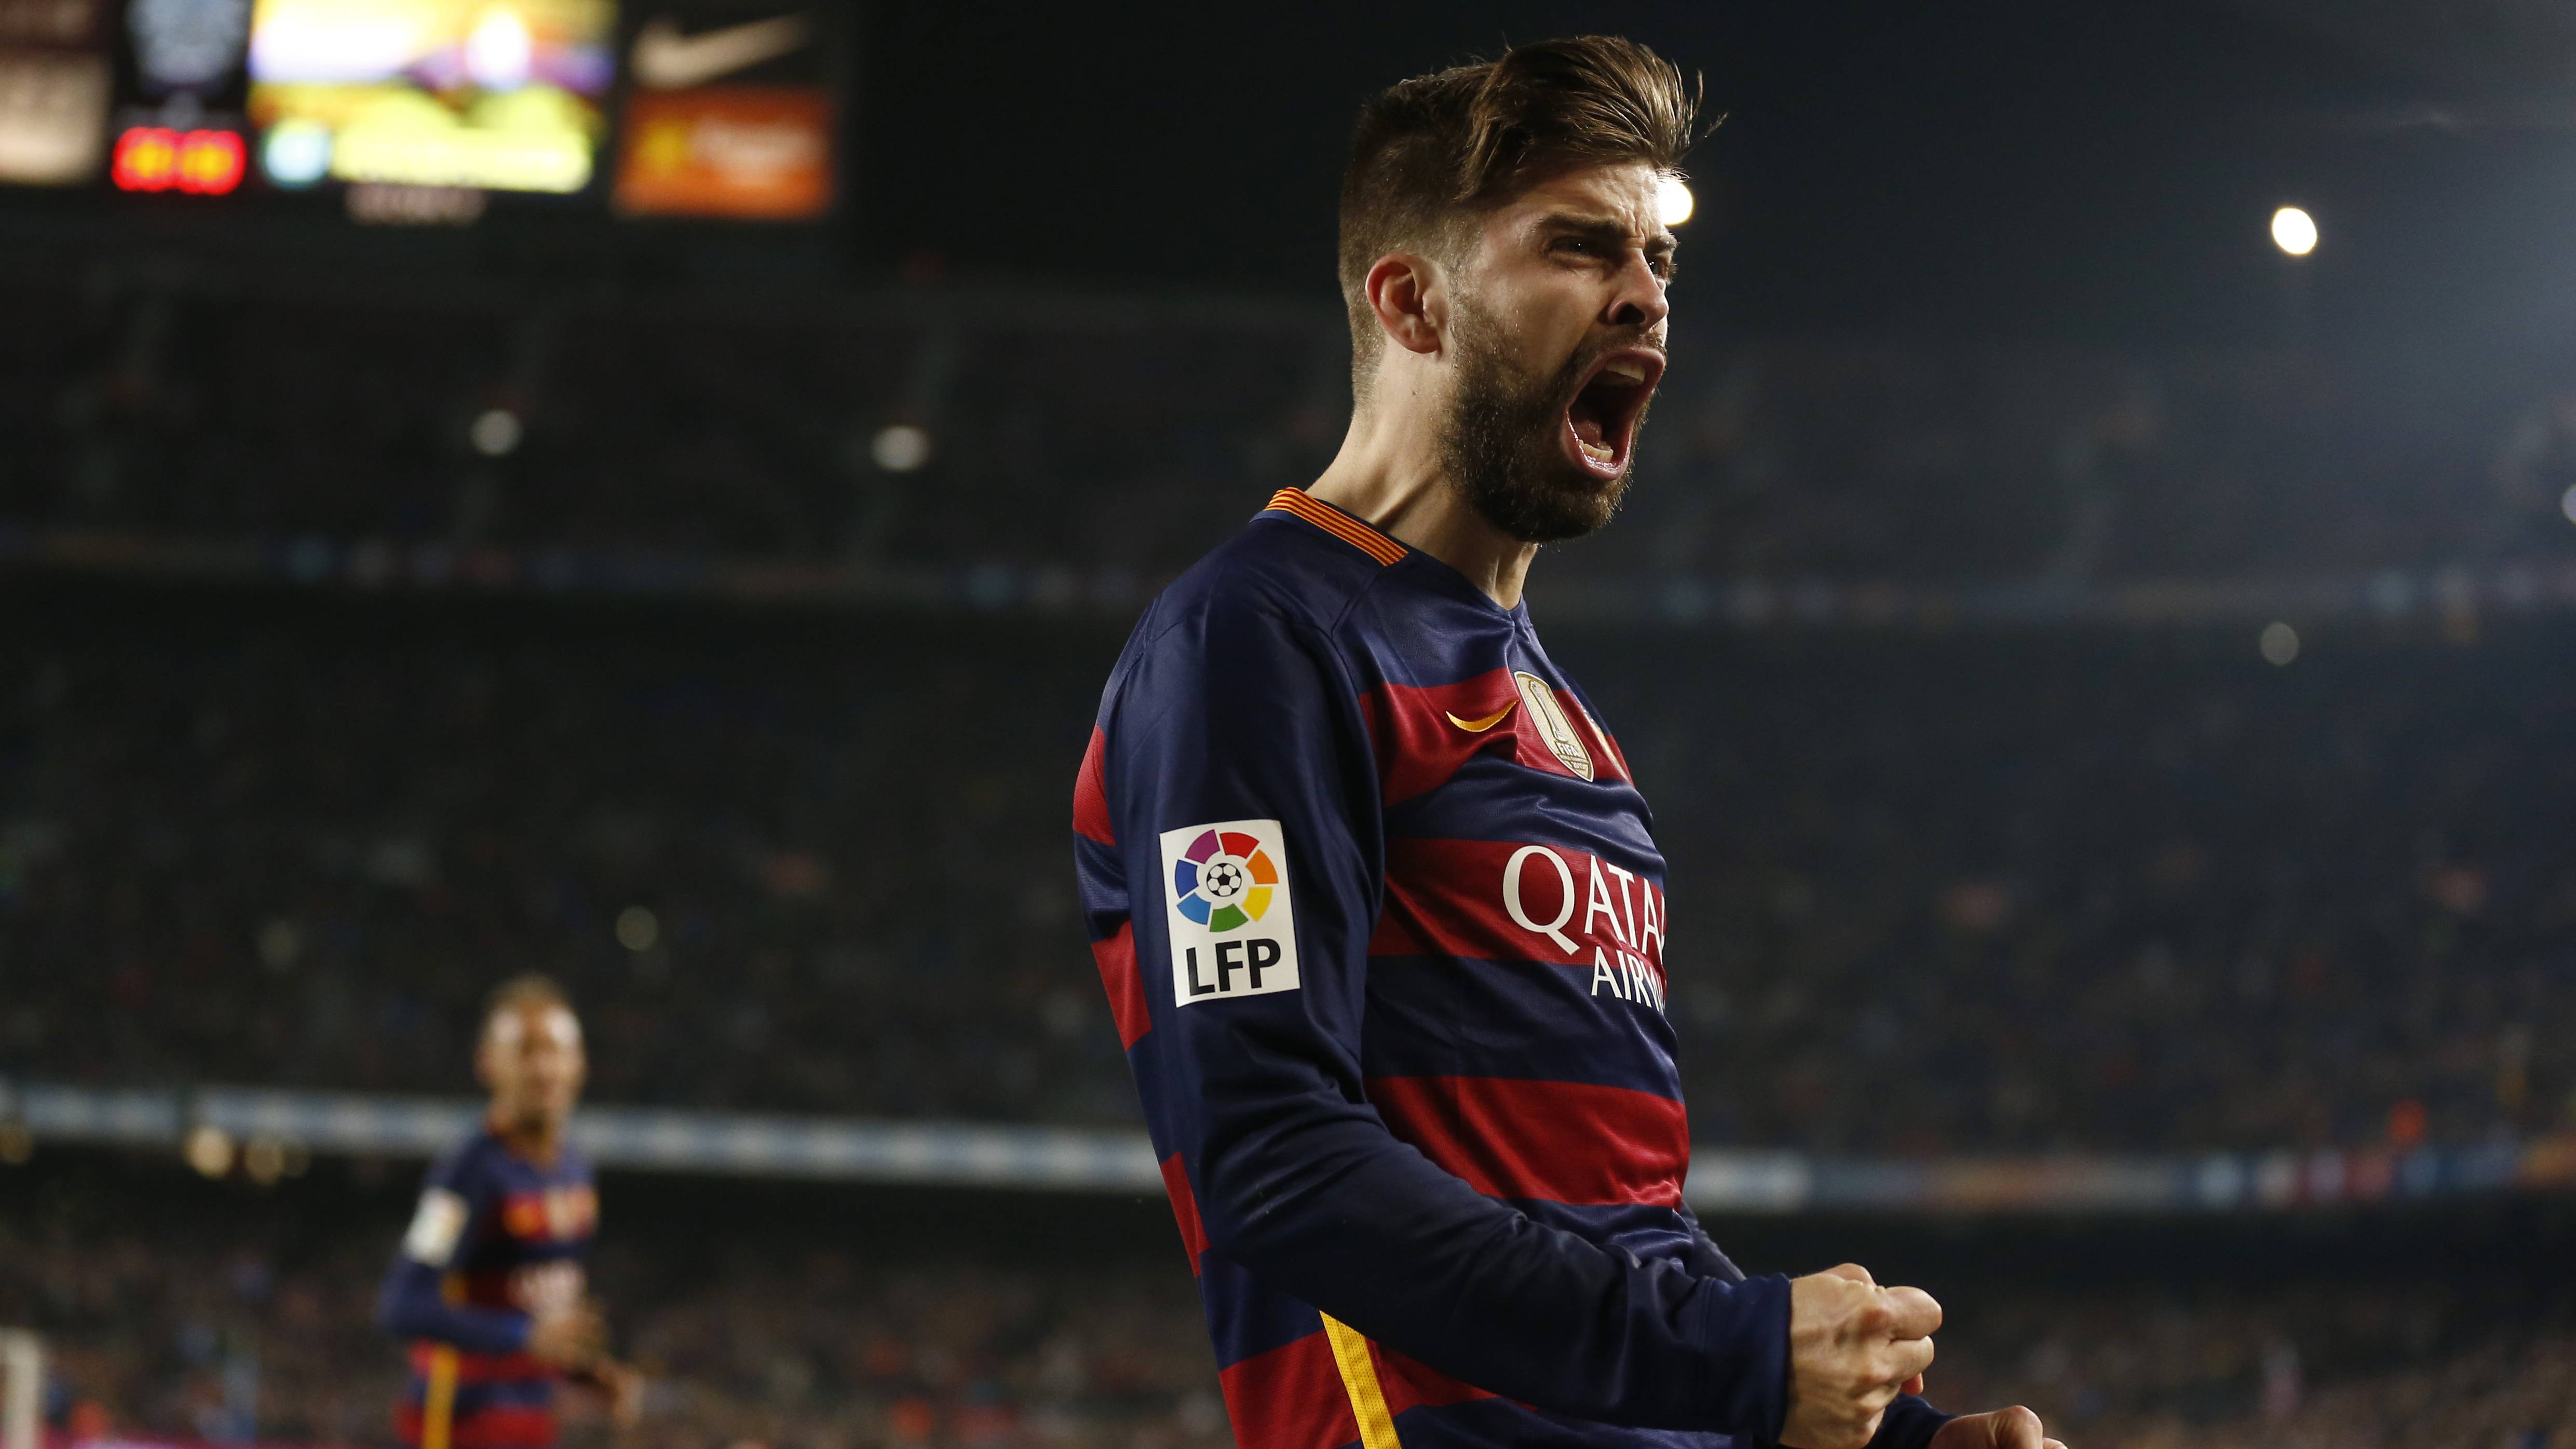 Gerard Hammered, celebrating a goal with the FC Barcelona